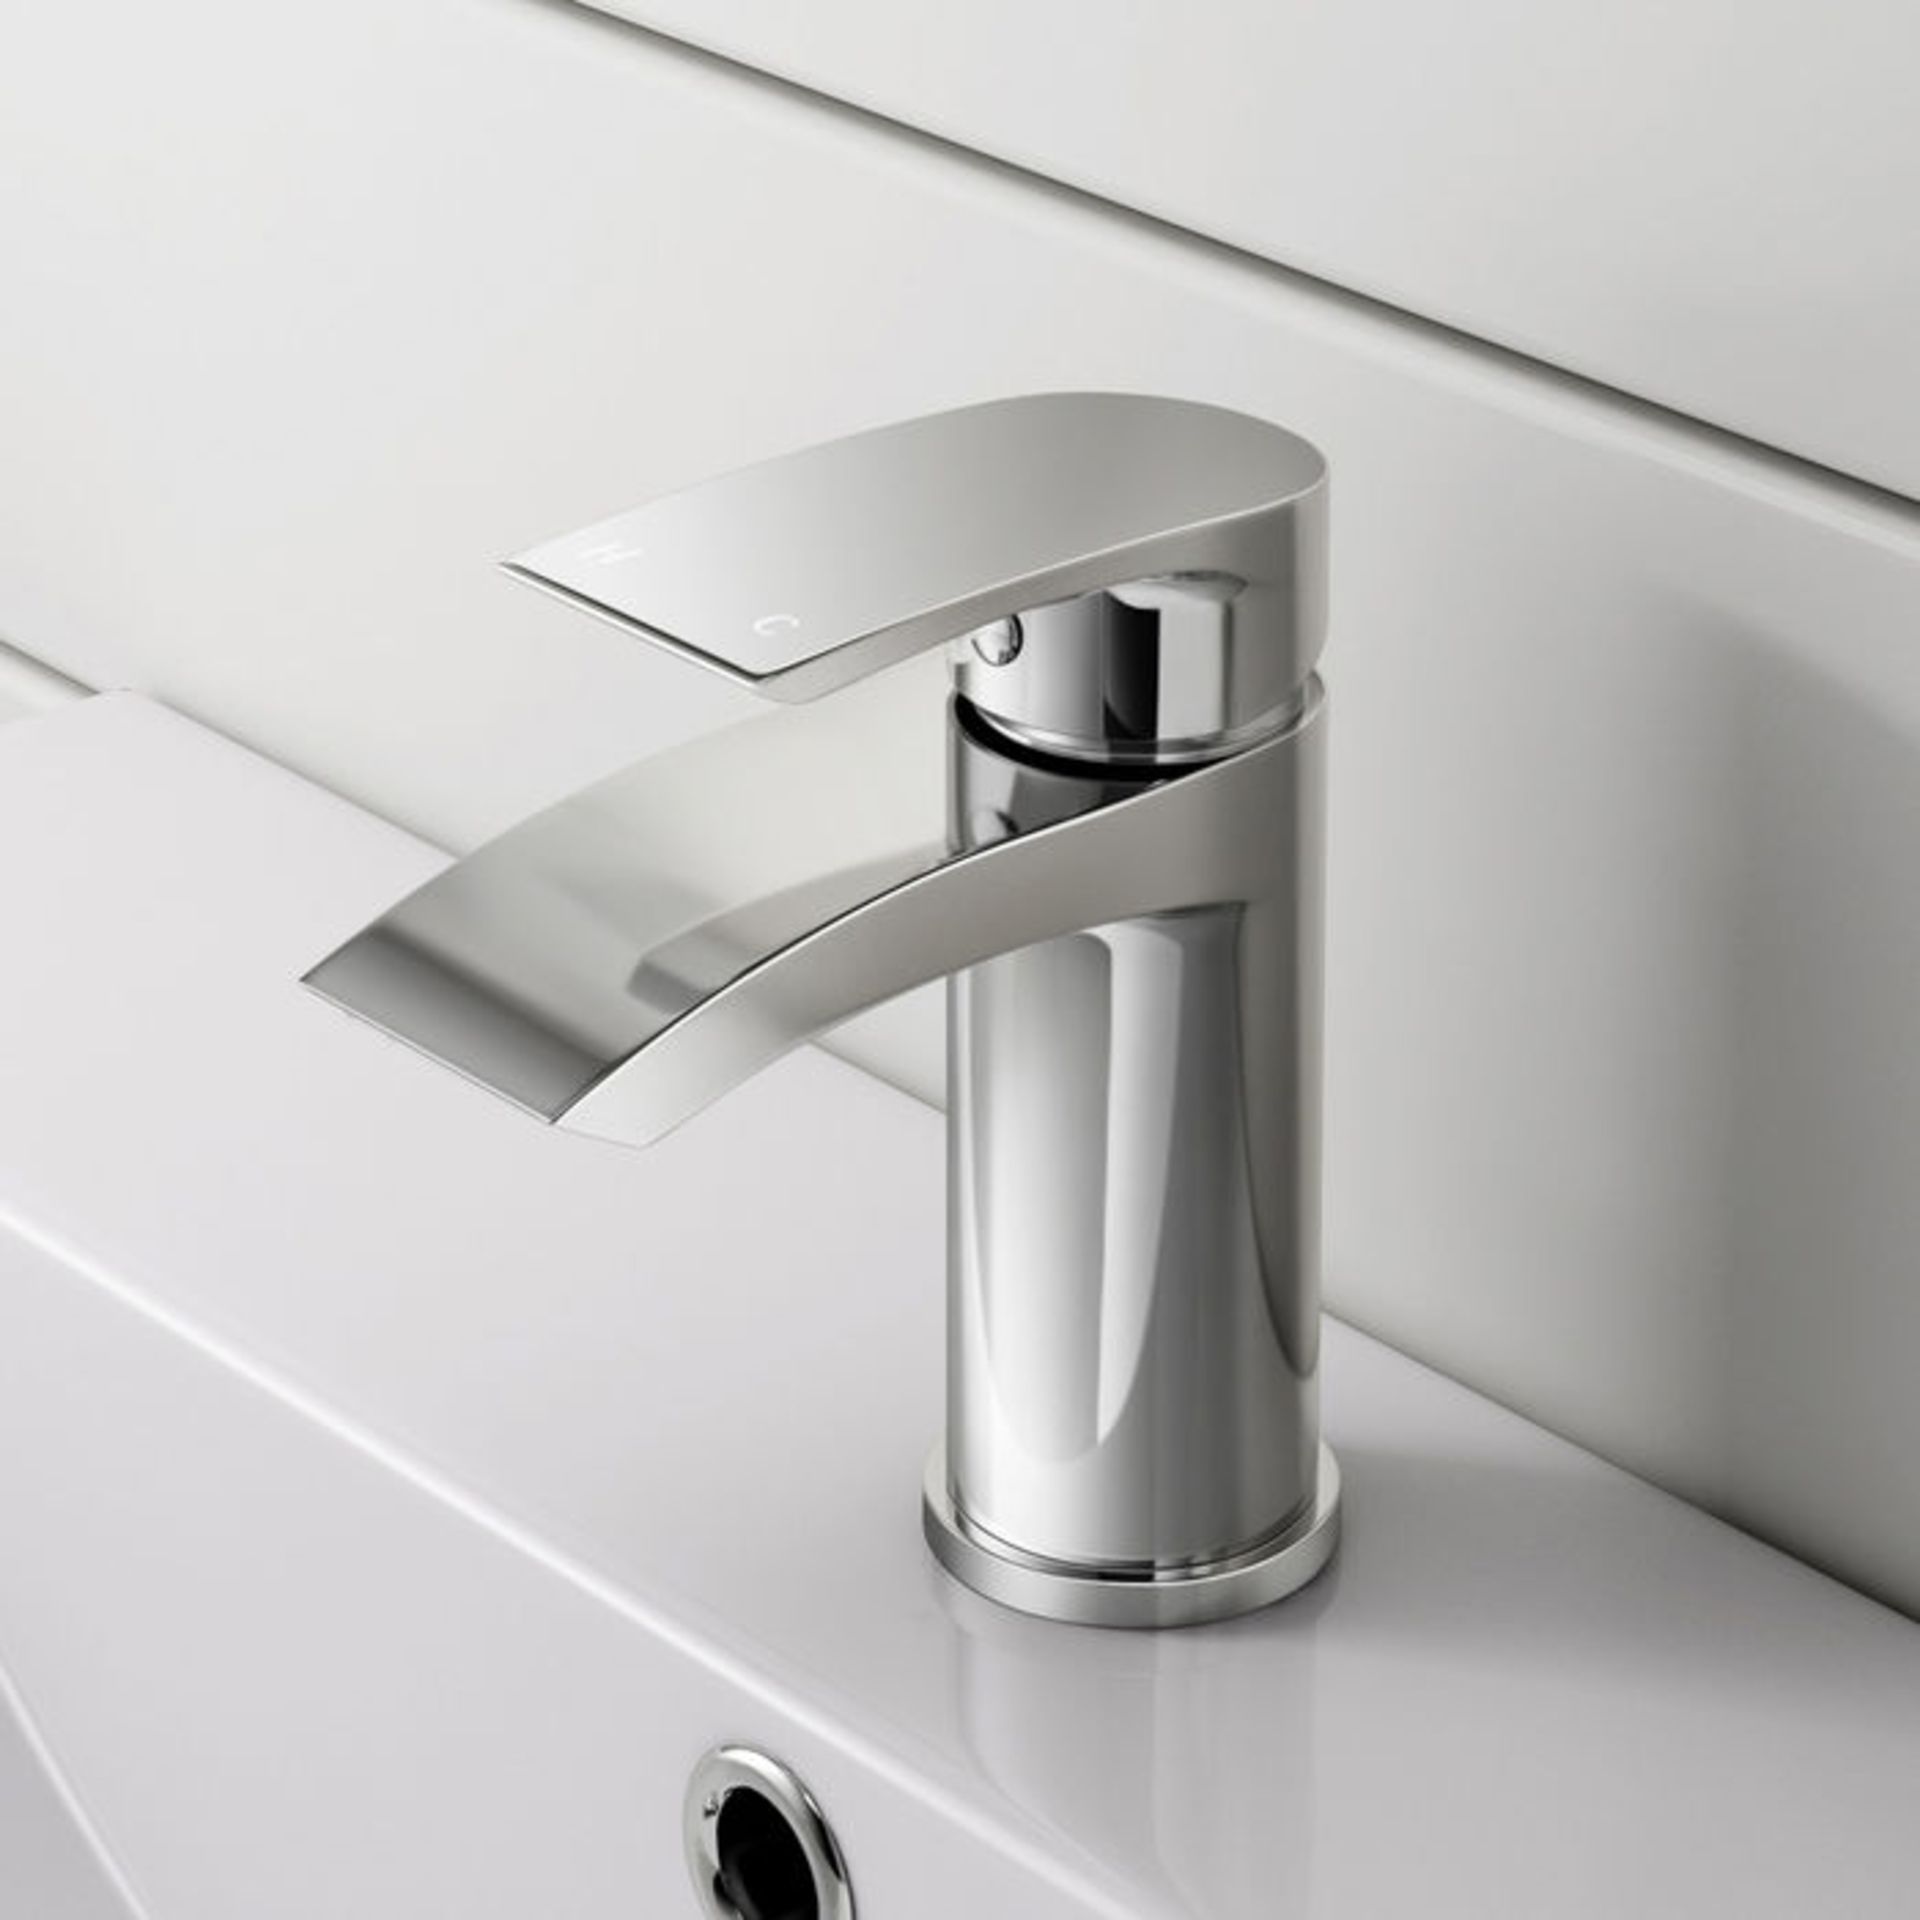 (AH37) Melbourne Basin Mixer Tap Crafted from chrome plated, corrosion free solid brass. Includes - Image 2 of 4